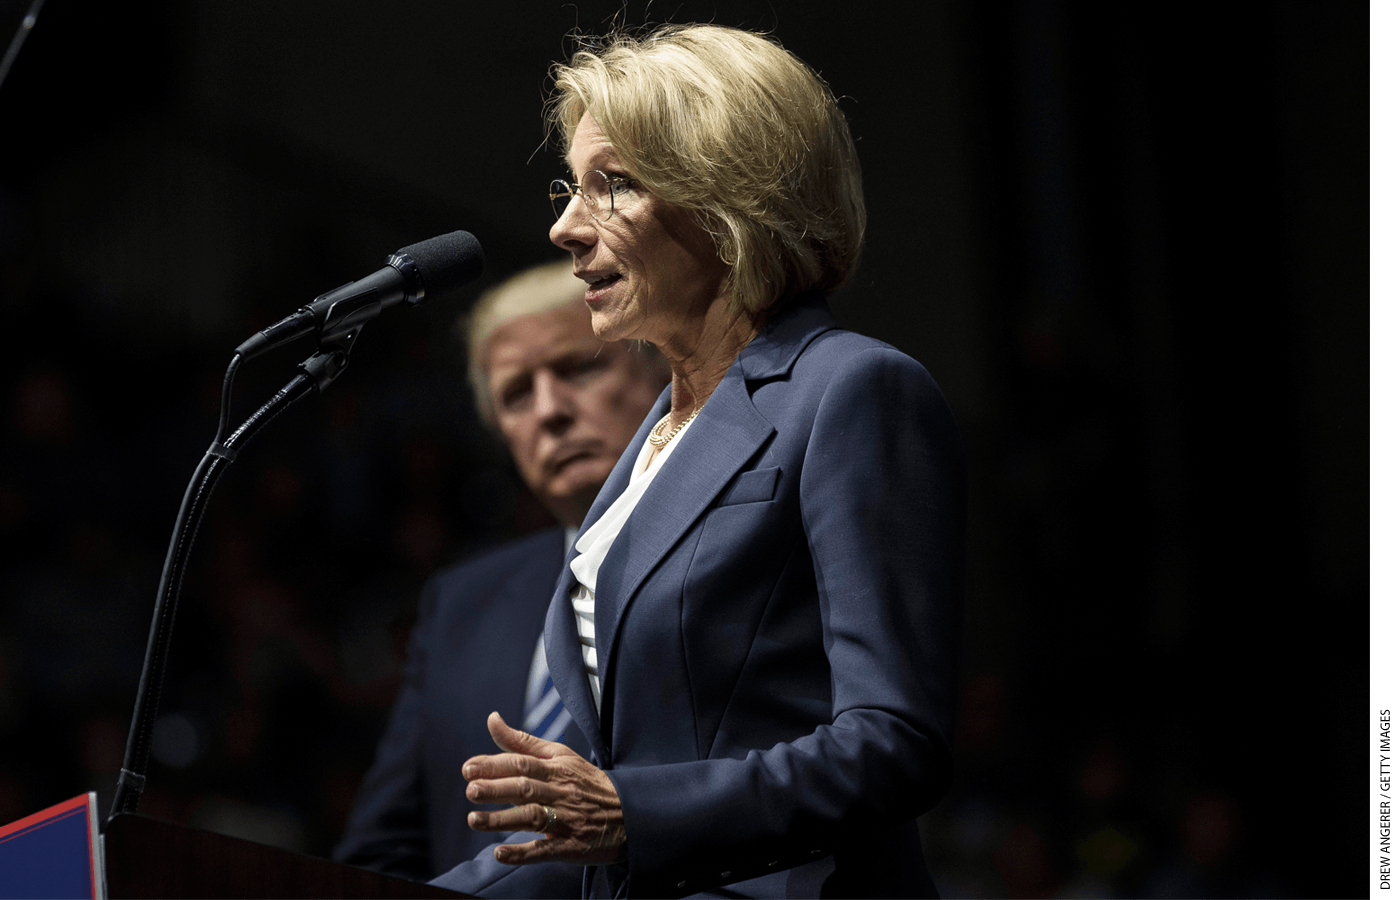 President-elect Donald Trump looks on as Betsy DeVos, his nominee for Secretary of Education, speaks at the DeltaPlex Arena, December 9, 2016 in Grand Rapids, Michigan.